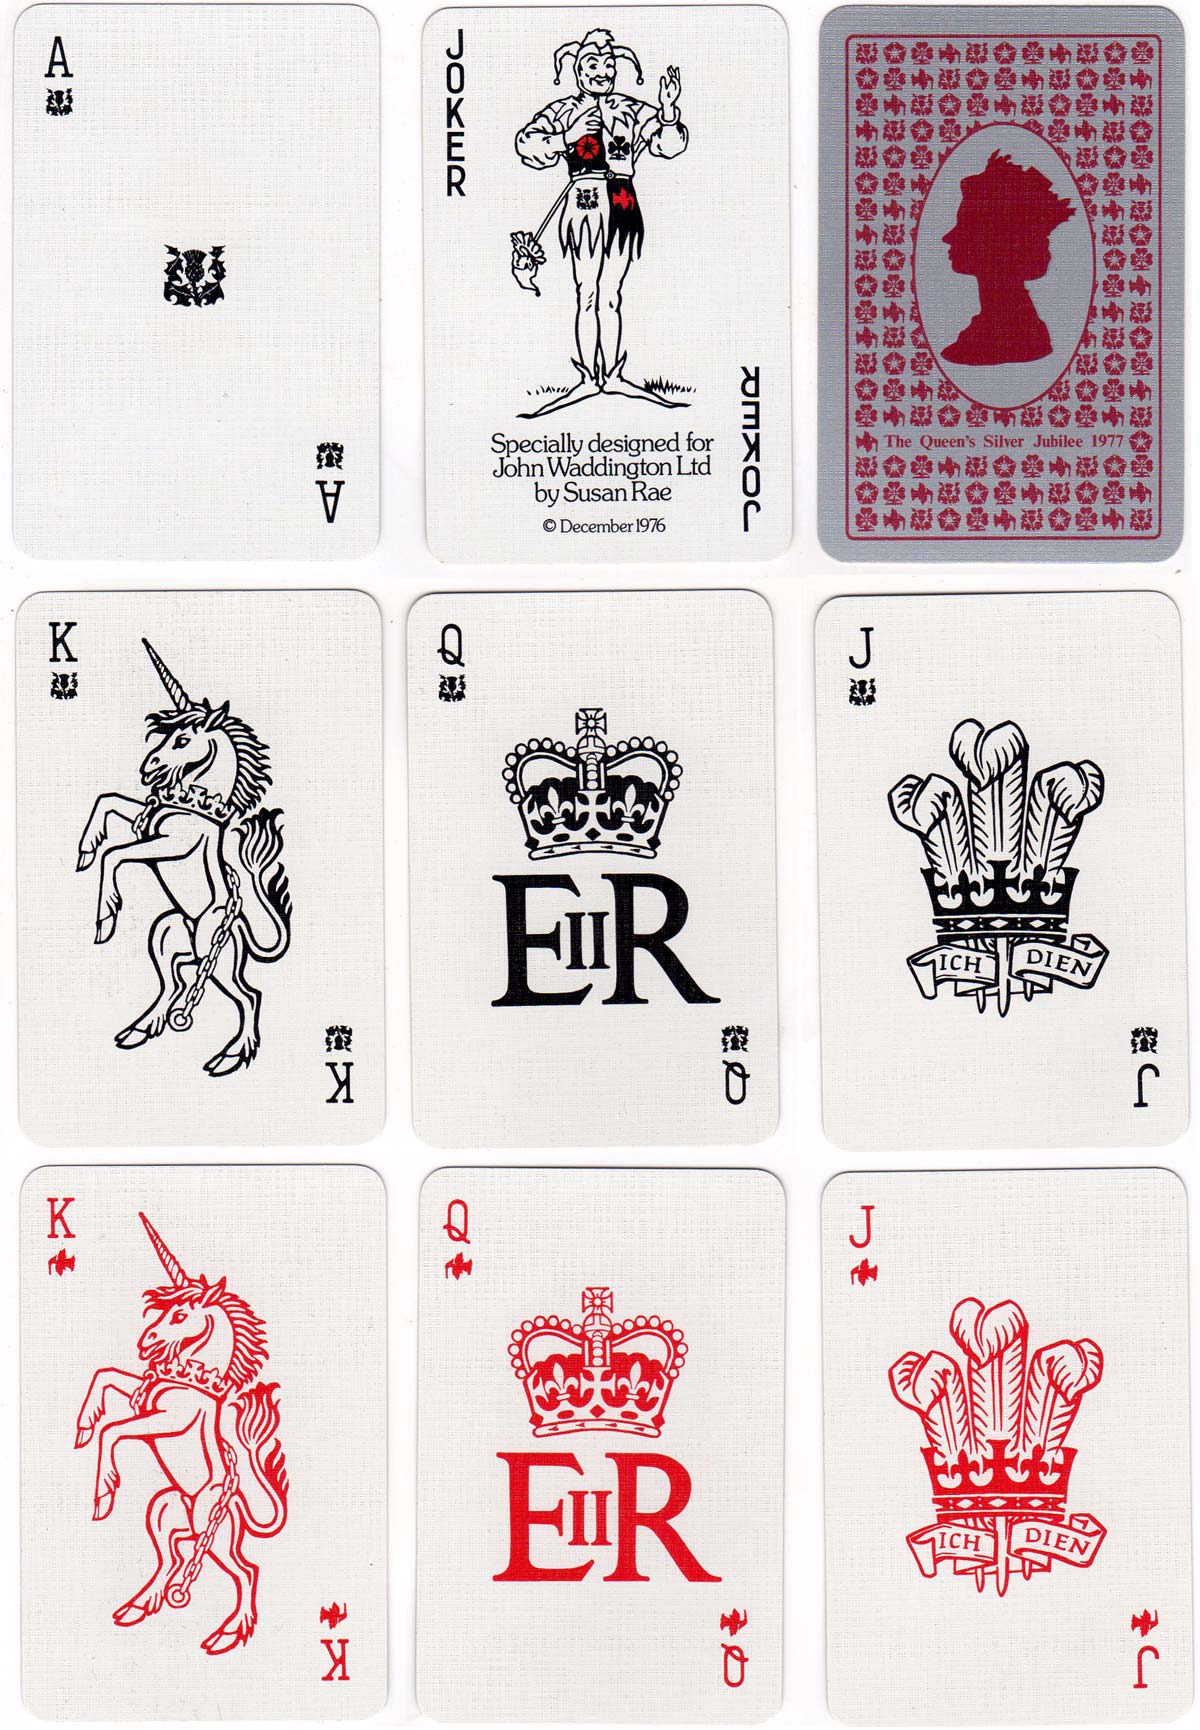 Queen’s Silver Jubilee playing cards designed by Susan Rae for John Wadddington Ltd, 1977